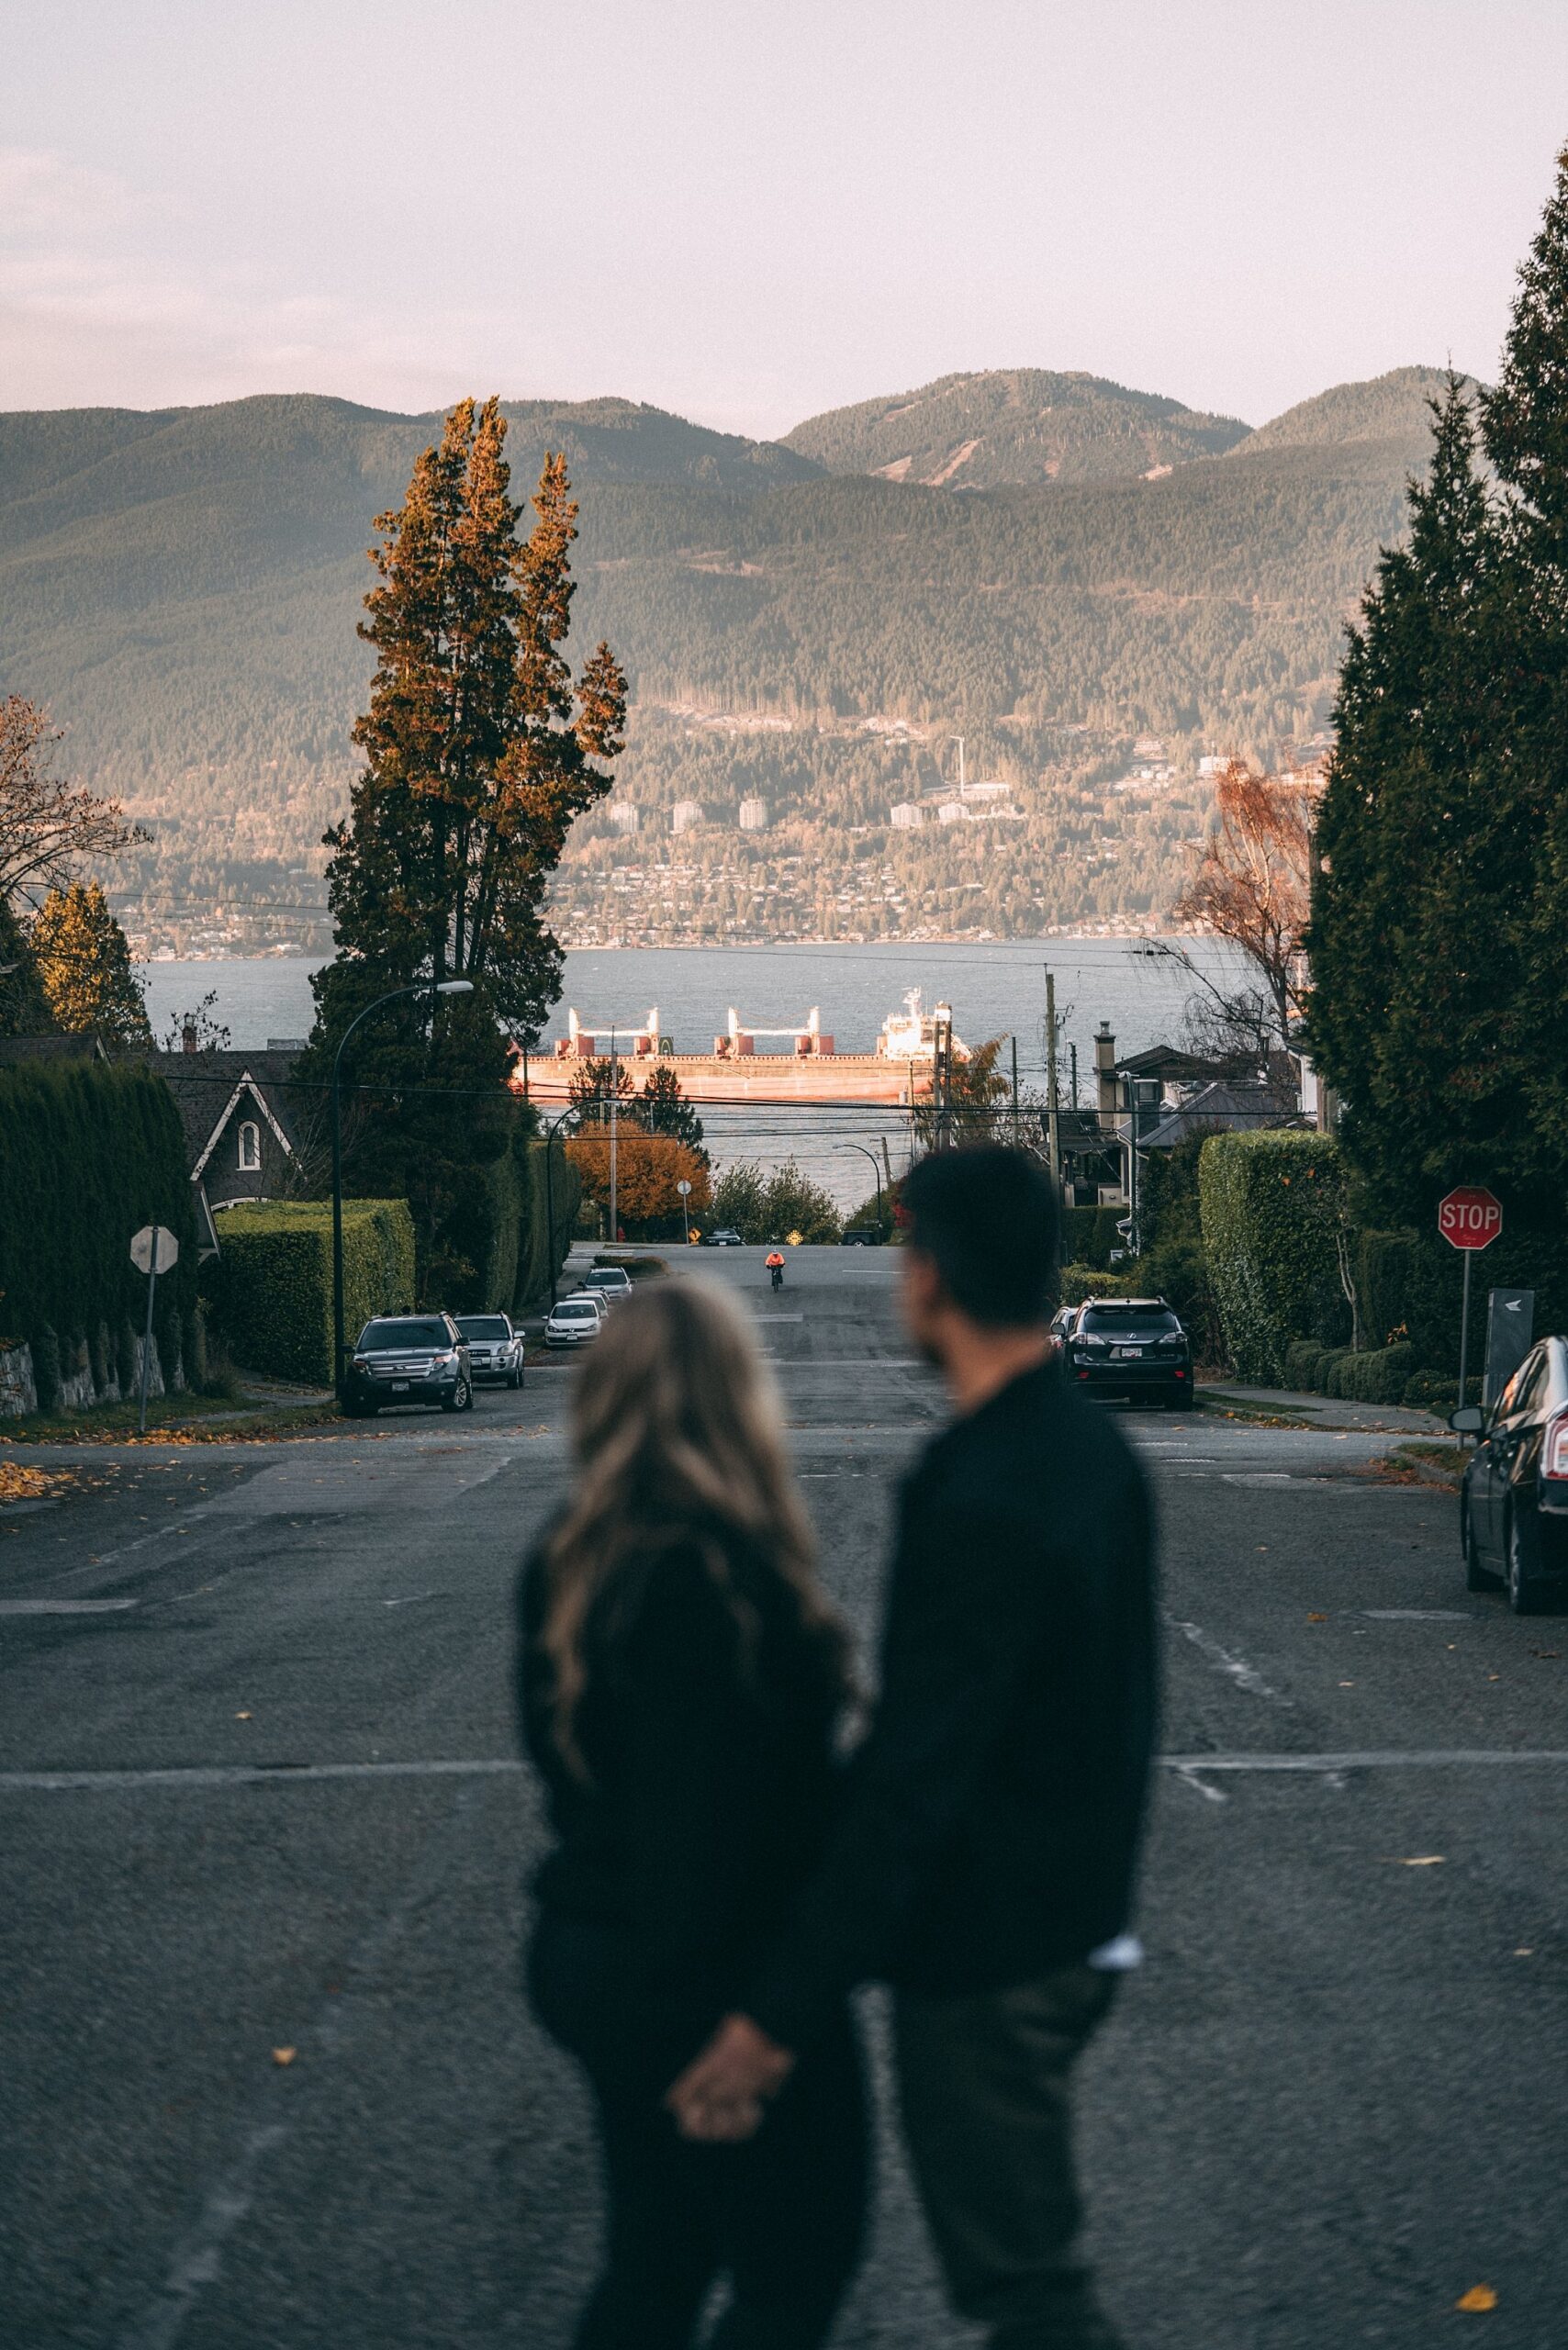 vancouver b.c. fall engagement photos